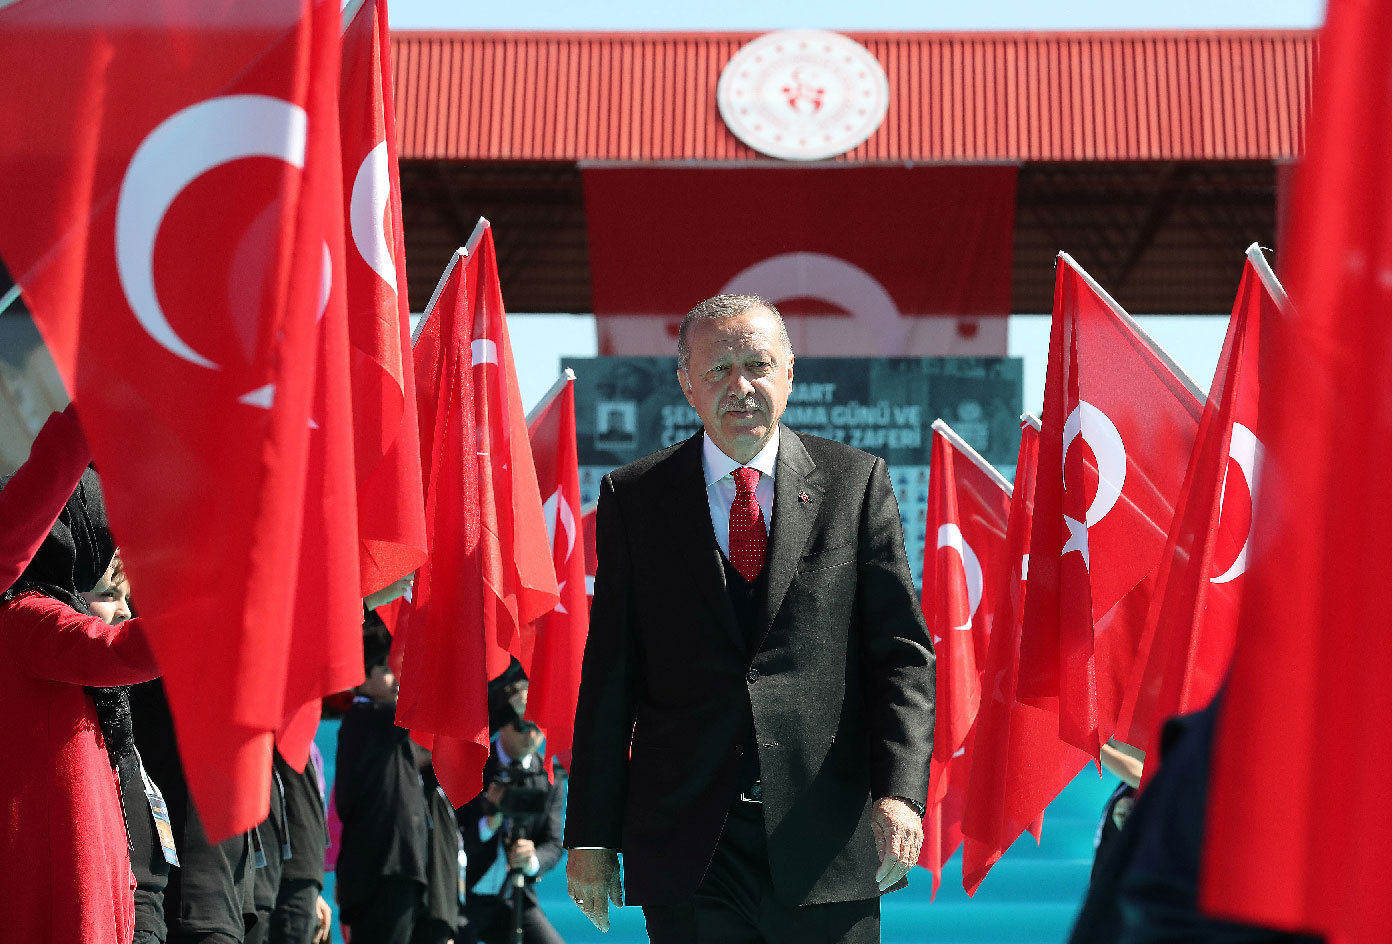 Turkish President Tayyip Erdogan attends a ceremony marking the 104th anniversary of Battle of Canakkale, also known as the Gallipoli Campaign, in Canakkale, Turkey March 18, 2019.